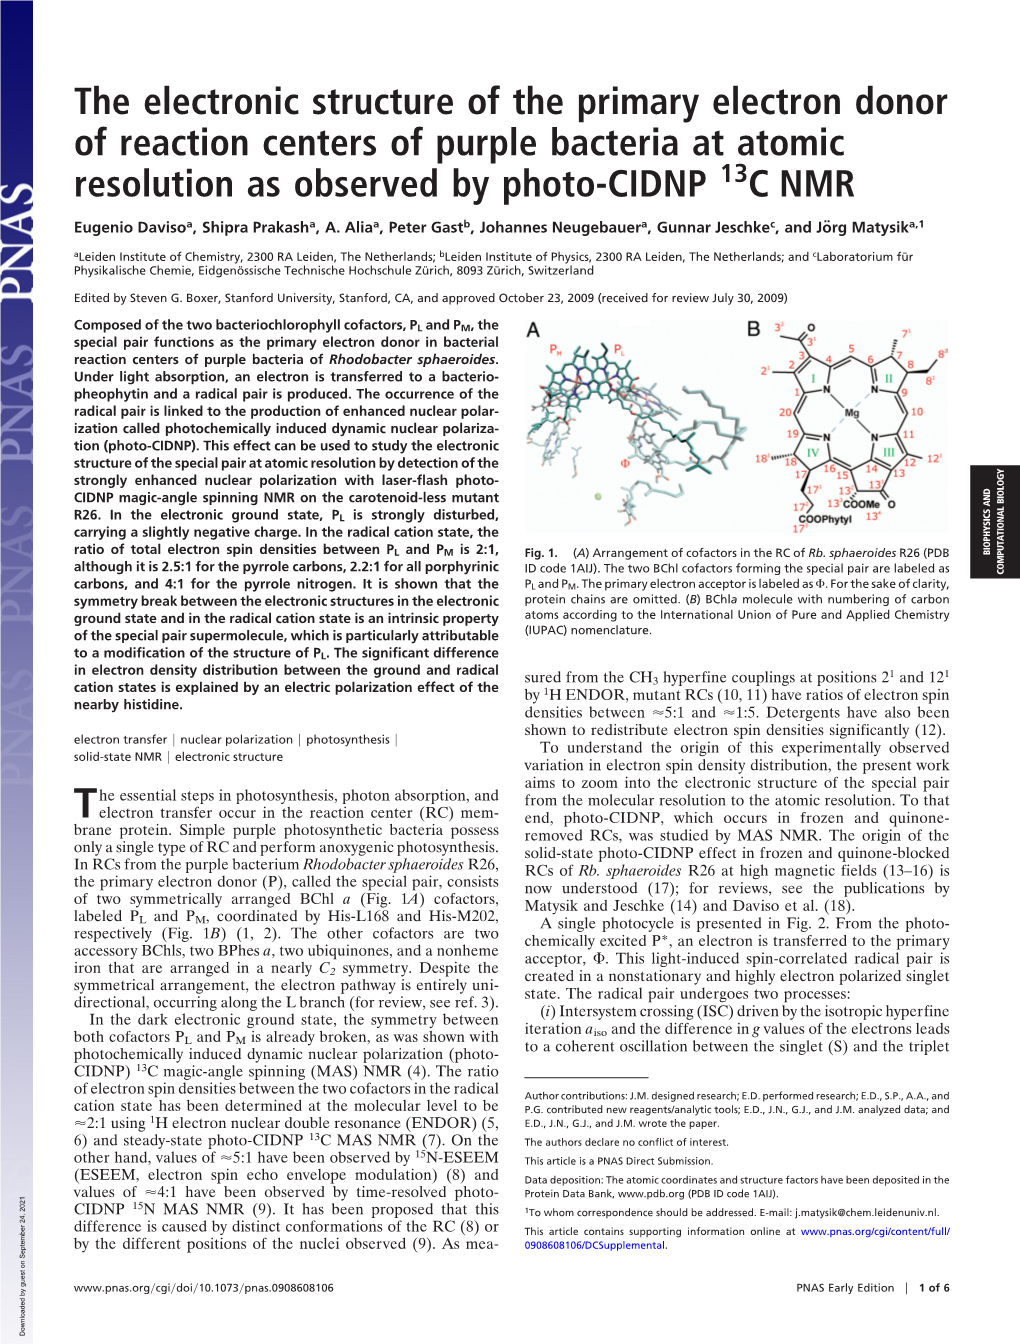 The Electronic Structure of the Primary Electron Donor of Reaction Centers of Purple Bacteria at Atomic Resolution As Observed by Photo-CIDNP 13C NMR